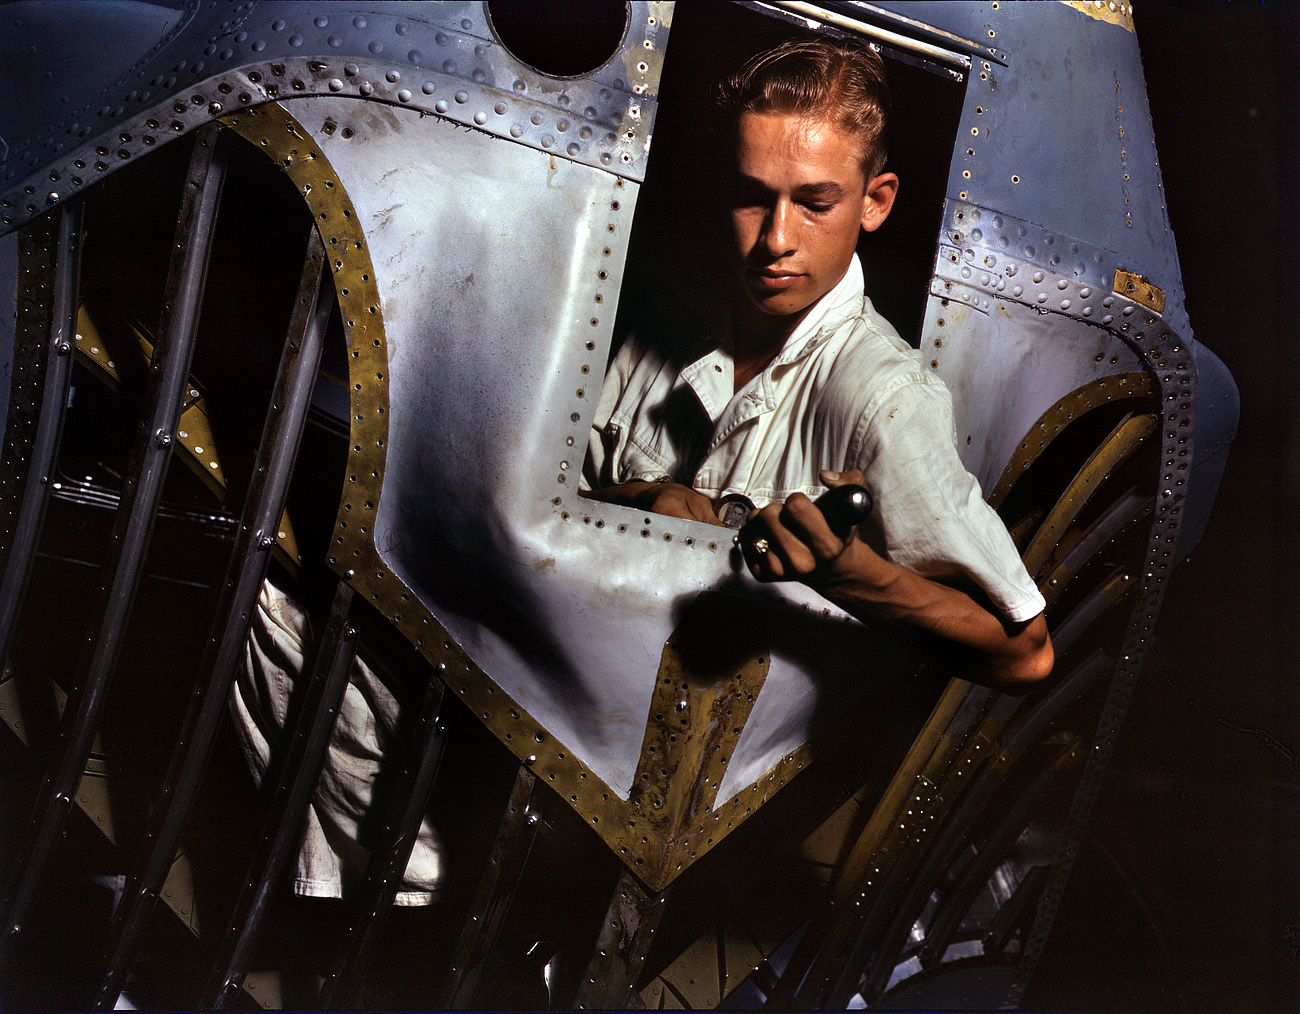 August 1942. Corpus Christi, Texas. "Working inside the nose of a PBY, Elmer J. Pace is learning the construction of Navy planes. As a National Youth Administration trainee at the Naval Air Base, he gets practical experience. After about eight weeks, he will go into civil service as a sheet metal worker." 4x5 Kodachrome transparency by Howard R. Hollem. View full size.